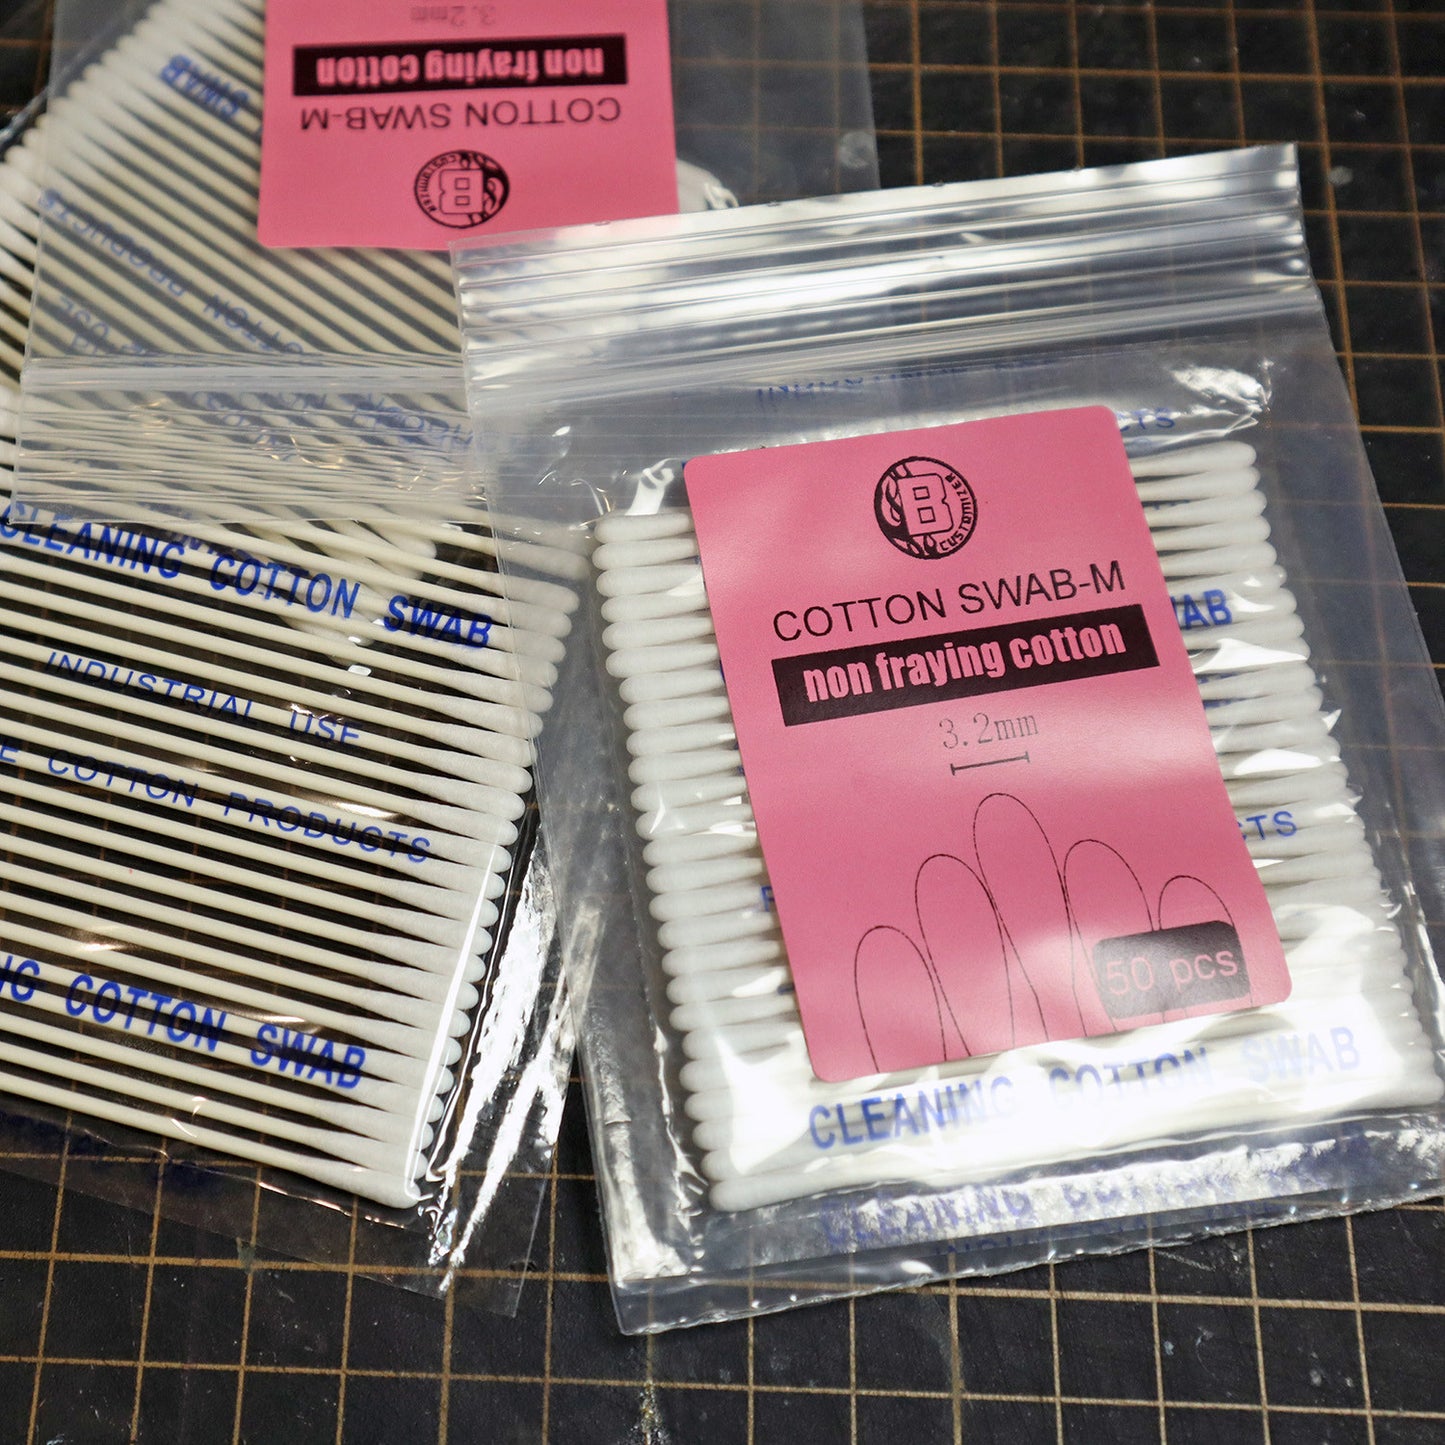 Non-Fraying Cotton swab / Industrial use cleaning cotton swab (50pcs)